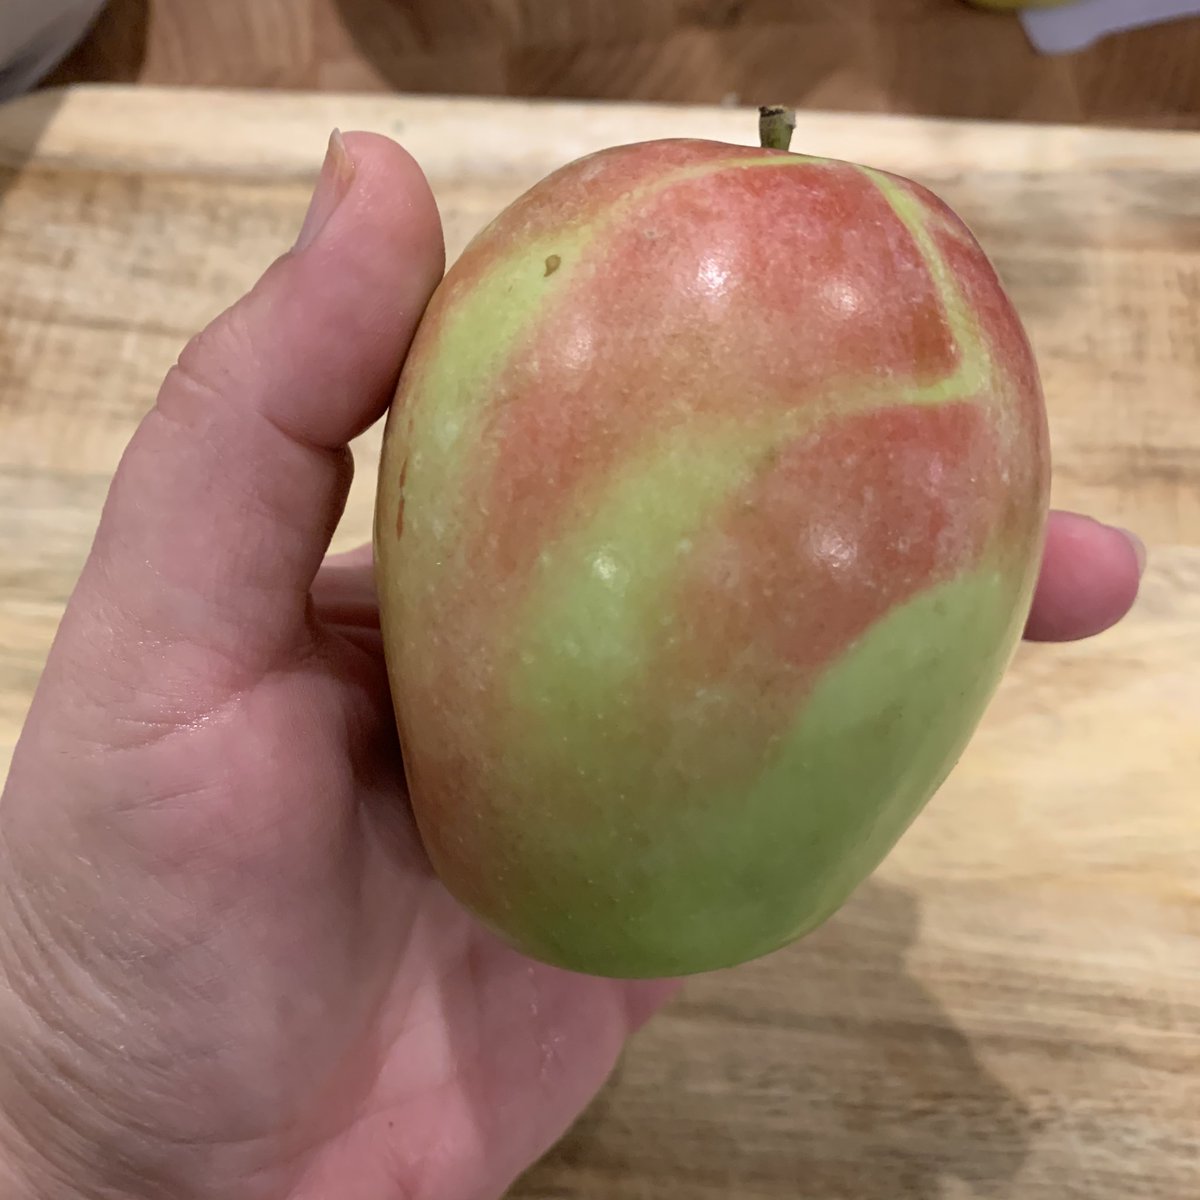 Meet “Kandil Sinap”, an heirloom from the 1800s, allegedly from Turkey (though maybe Russia, really) — note the sexy elongated shape and pretty coloring! The flesh is bright and creamy, juicy, but with a very mild (neither sweet nor tart) kinda... watery flavor. 6/10 bc pretty